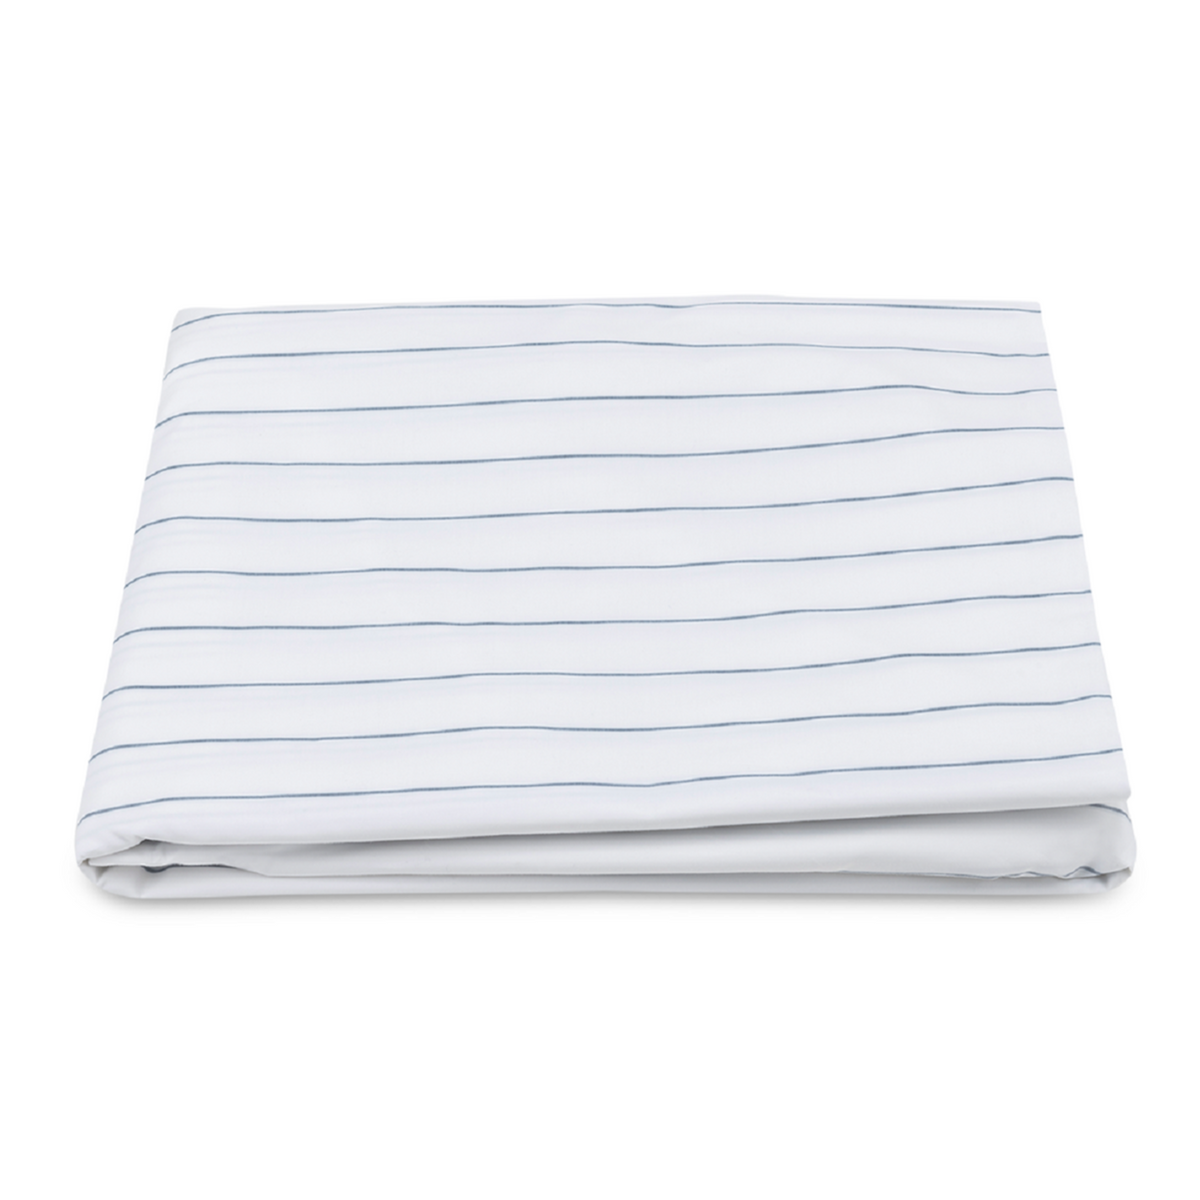 Folded Fitted Sheet of Matouk Amalfi Bedding in Mediterranean  Color